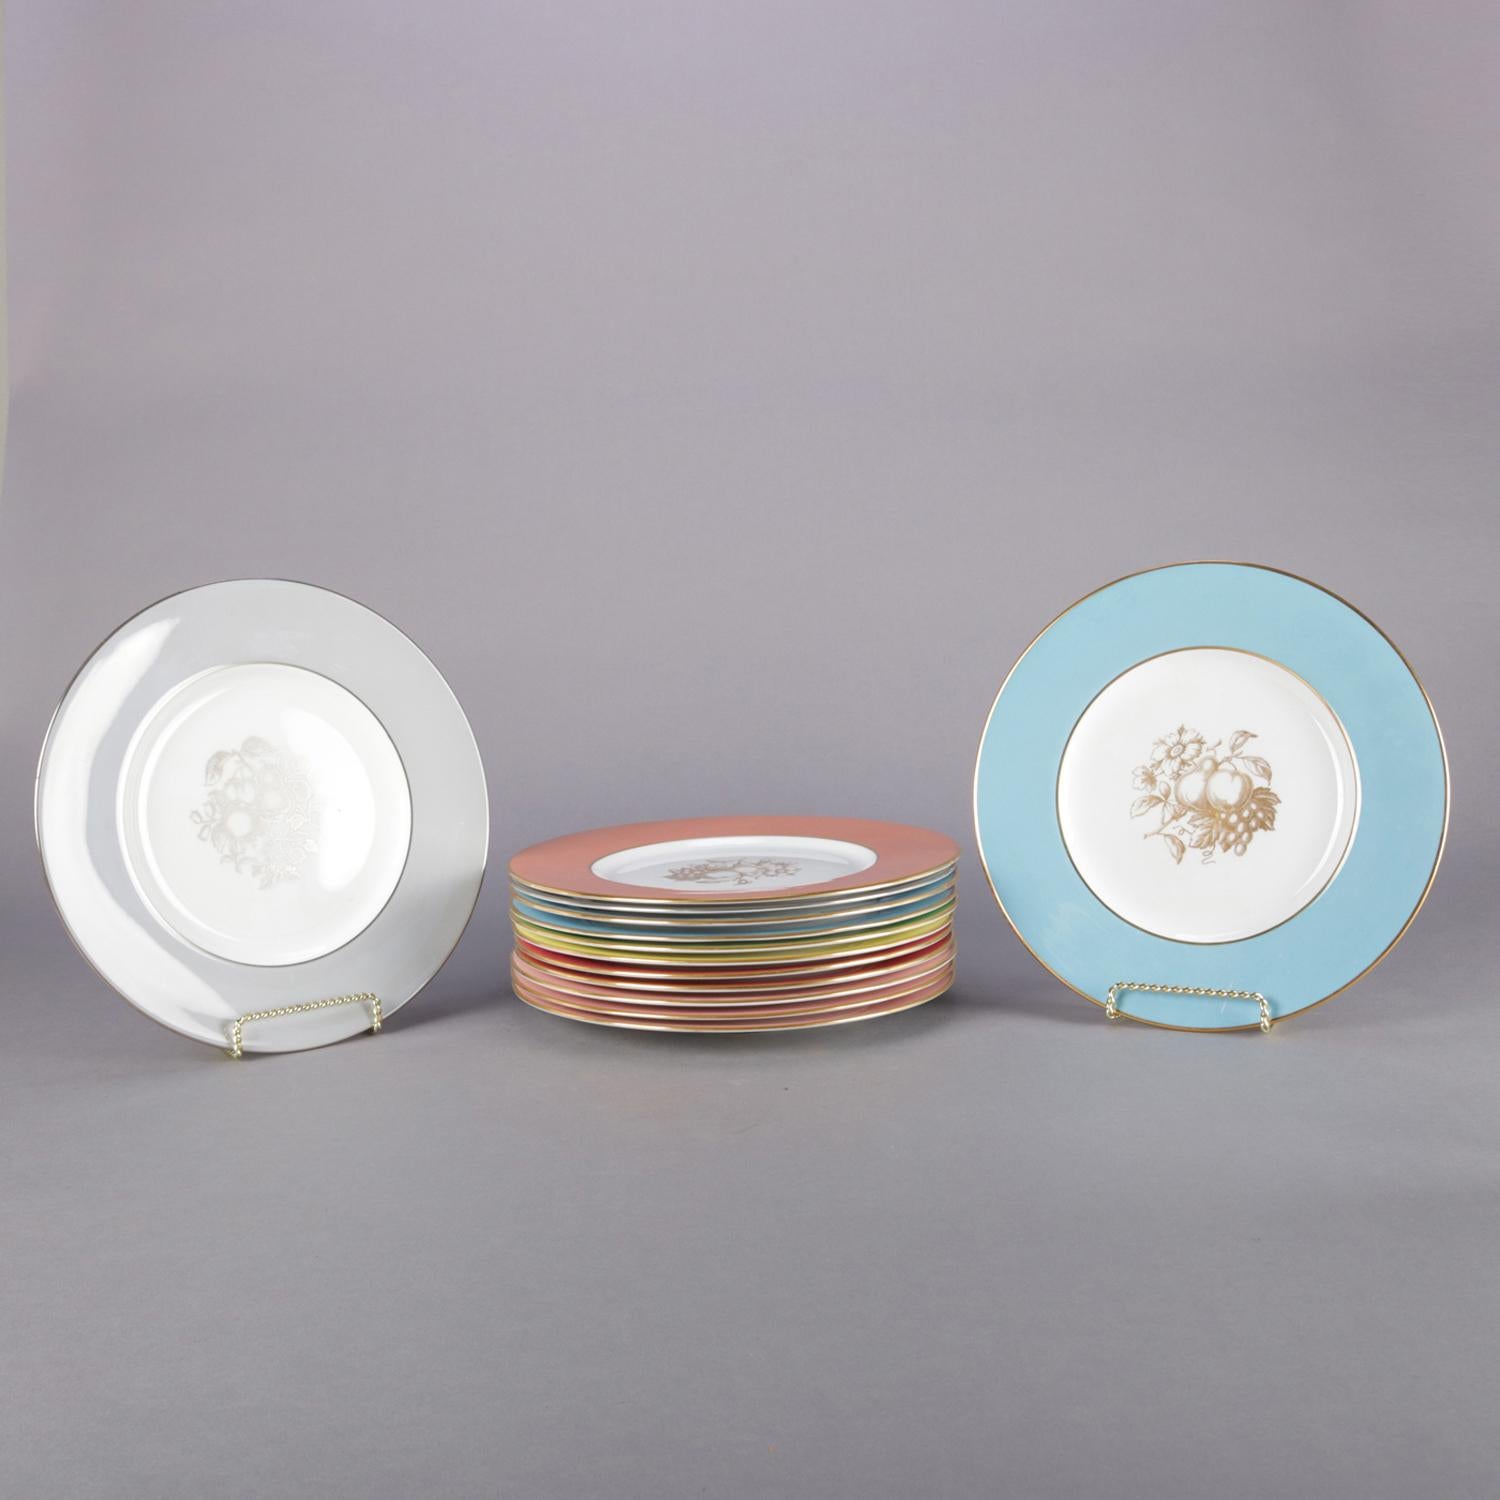 Set of 13 English porcelain dinner plates by Spode feature multi colored rims in pastel palette with gilt trim (all gold gilt except grey rims with silver gilt) and central fruit and floral motif, en verso 